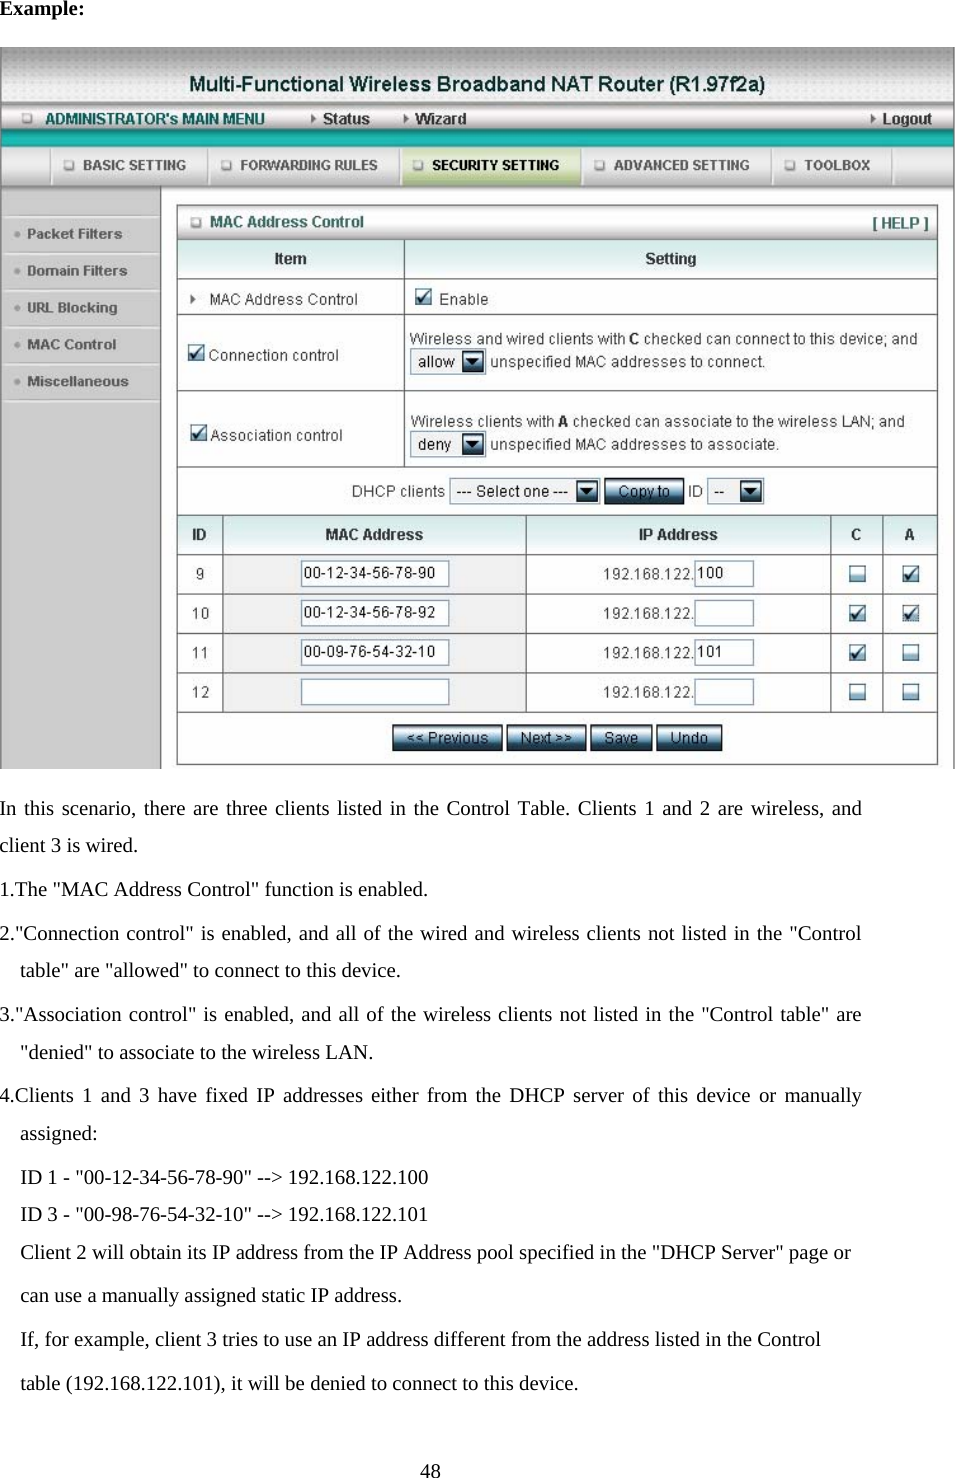  48Example:  In this scenario, there are three clients listed in the Control Table. Clients 1 and 2 are wireless, and client 3 is wired.   1.The &quot;MAC Address Control&quot; function is enabled.   2.&quot;Connection control&quot; is enabled, and all of the wired and wireless clients not listed in the &quot;Control table&quot; are &quot;allowed&quot; to connect to this device.   3.&quot;Association control&quot; is enabled, and all of the wireless clients not listed in the &quot;Control table&quot; are &quot;denied&quot; to associate to the wireless LAN.   4.Clients 1 and 3 have fixed IP addresses either from the DHCP server of this device or manually assigned: ID 1 - &quot;00-12-34-56-78-90&quot; --&gt; 192.168.122.100 ID 3 - &quot;00-98-76-54-32-10&quot; --&gt; 192.168.122.101 Client 2 will obtain its IP address from the IP Address pool specified in the &quot;DHCP Server&quot; page or   can use a manually assigned static IP address. If, for example, client 3 tries to use an IP address different from the address listed in the Control   table (192.168.122.101), it will be denied to connect to this device.   